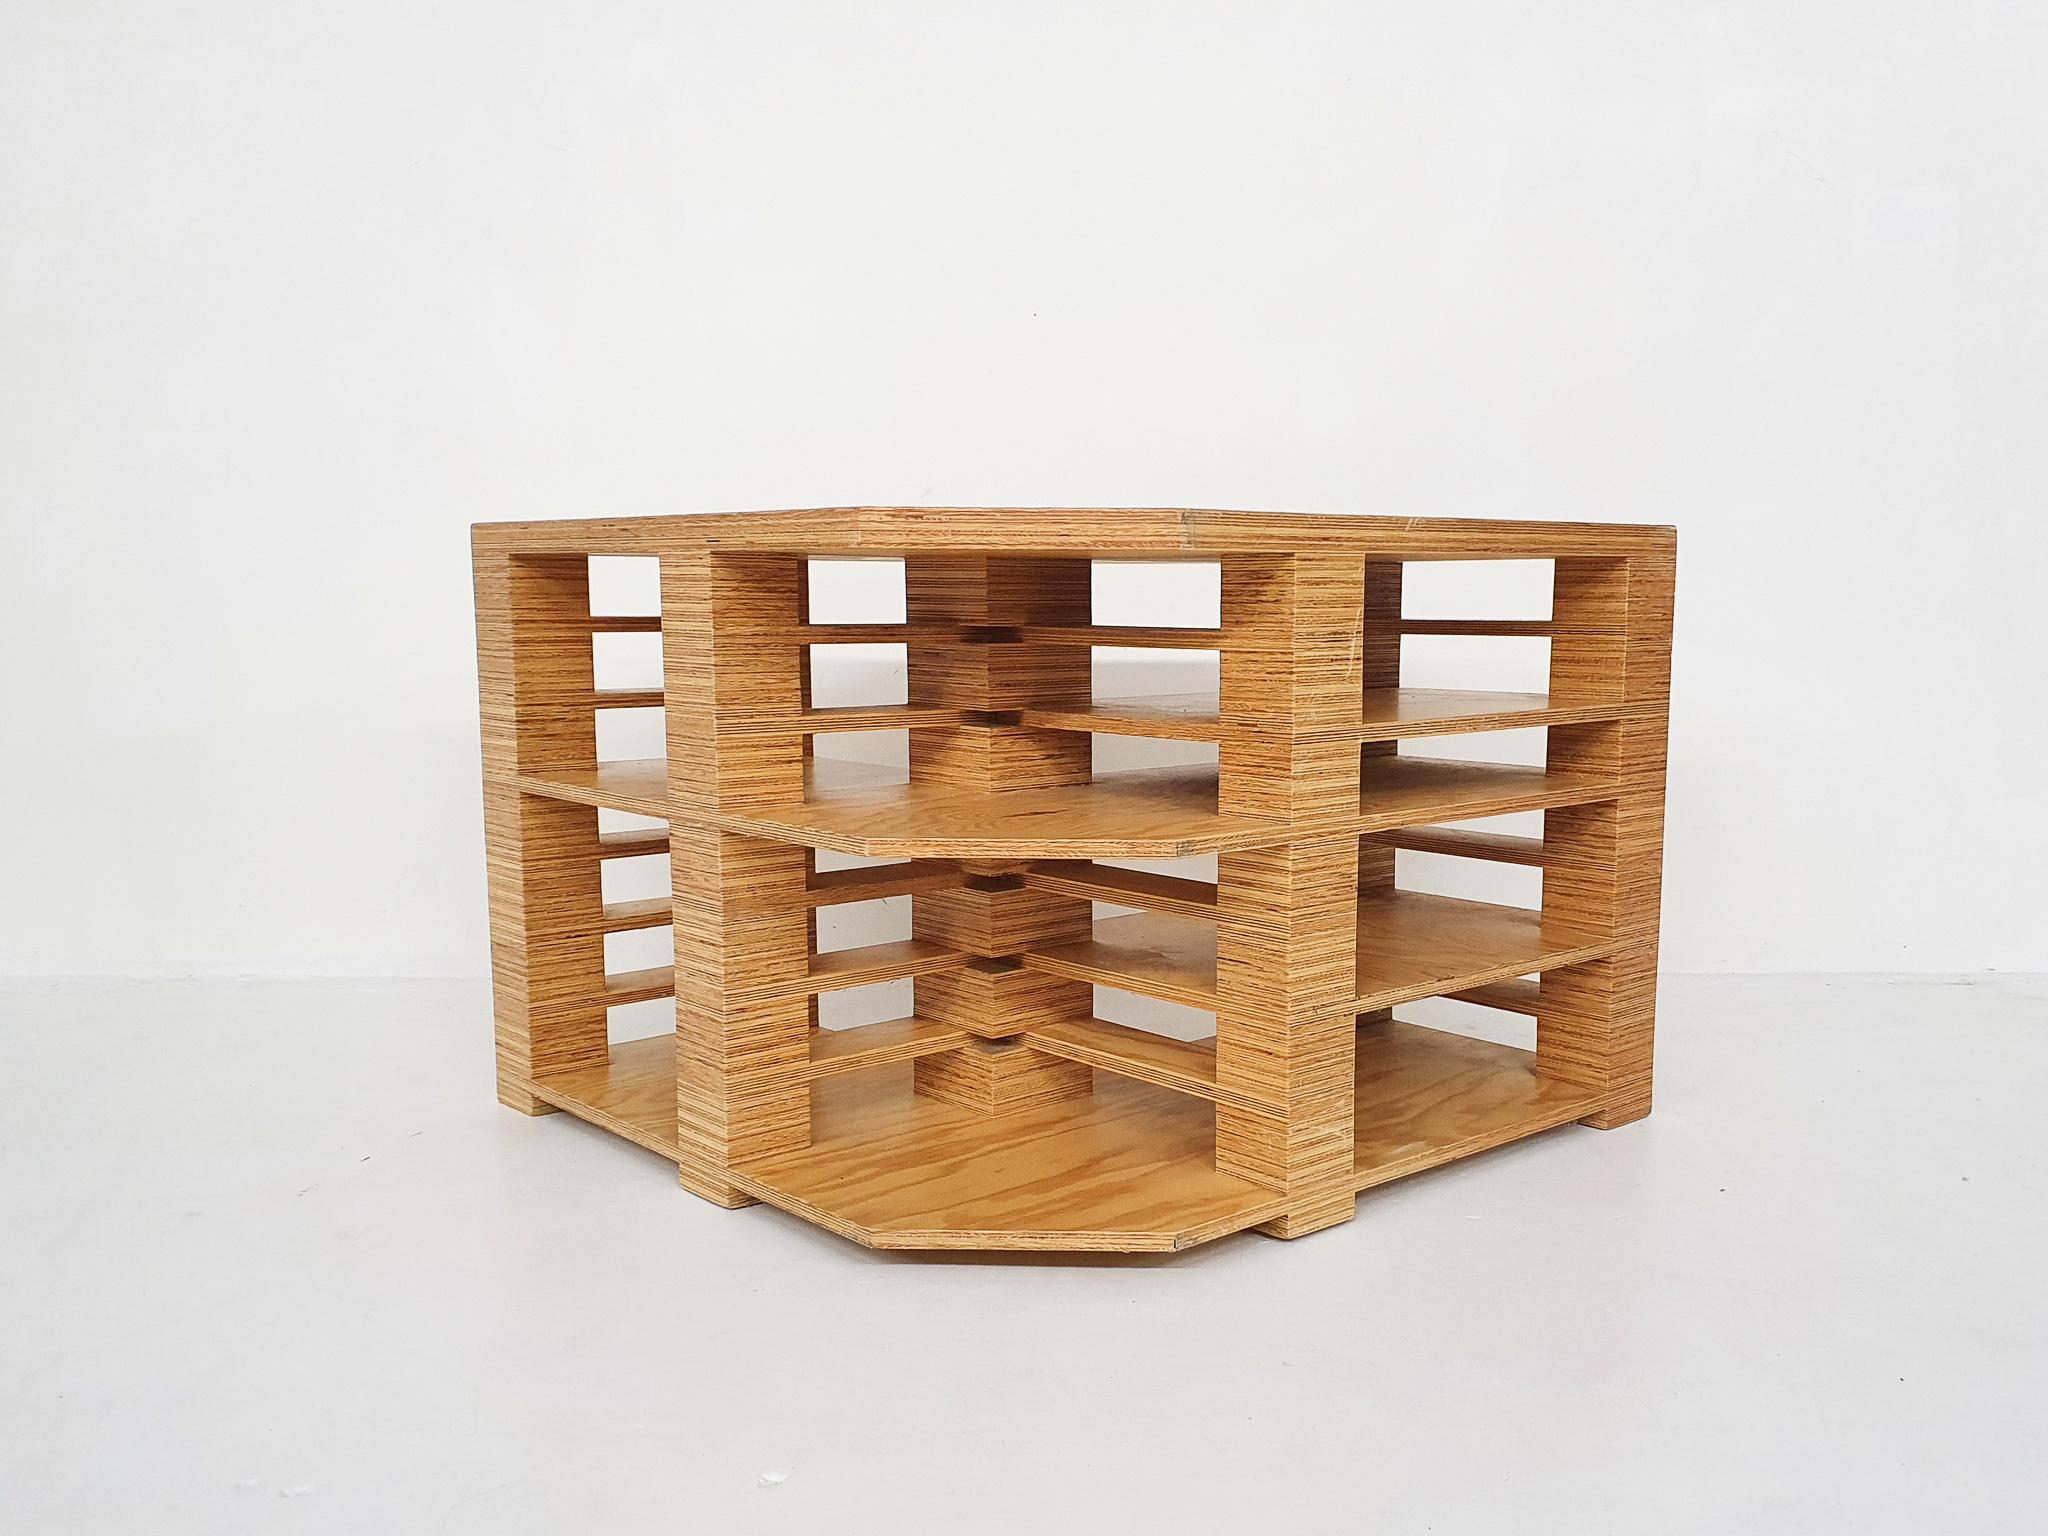 Plywood desk to be placed free standing or in a corner. Designed in The Netherlands , probably in the eighties
Very nicely made of plywood glued together to create several storage shelves. No screws are used anywhere
The desk is a-symmetrical, the